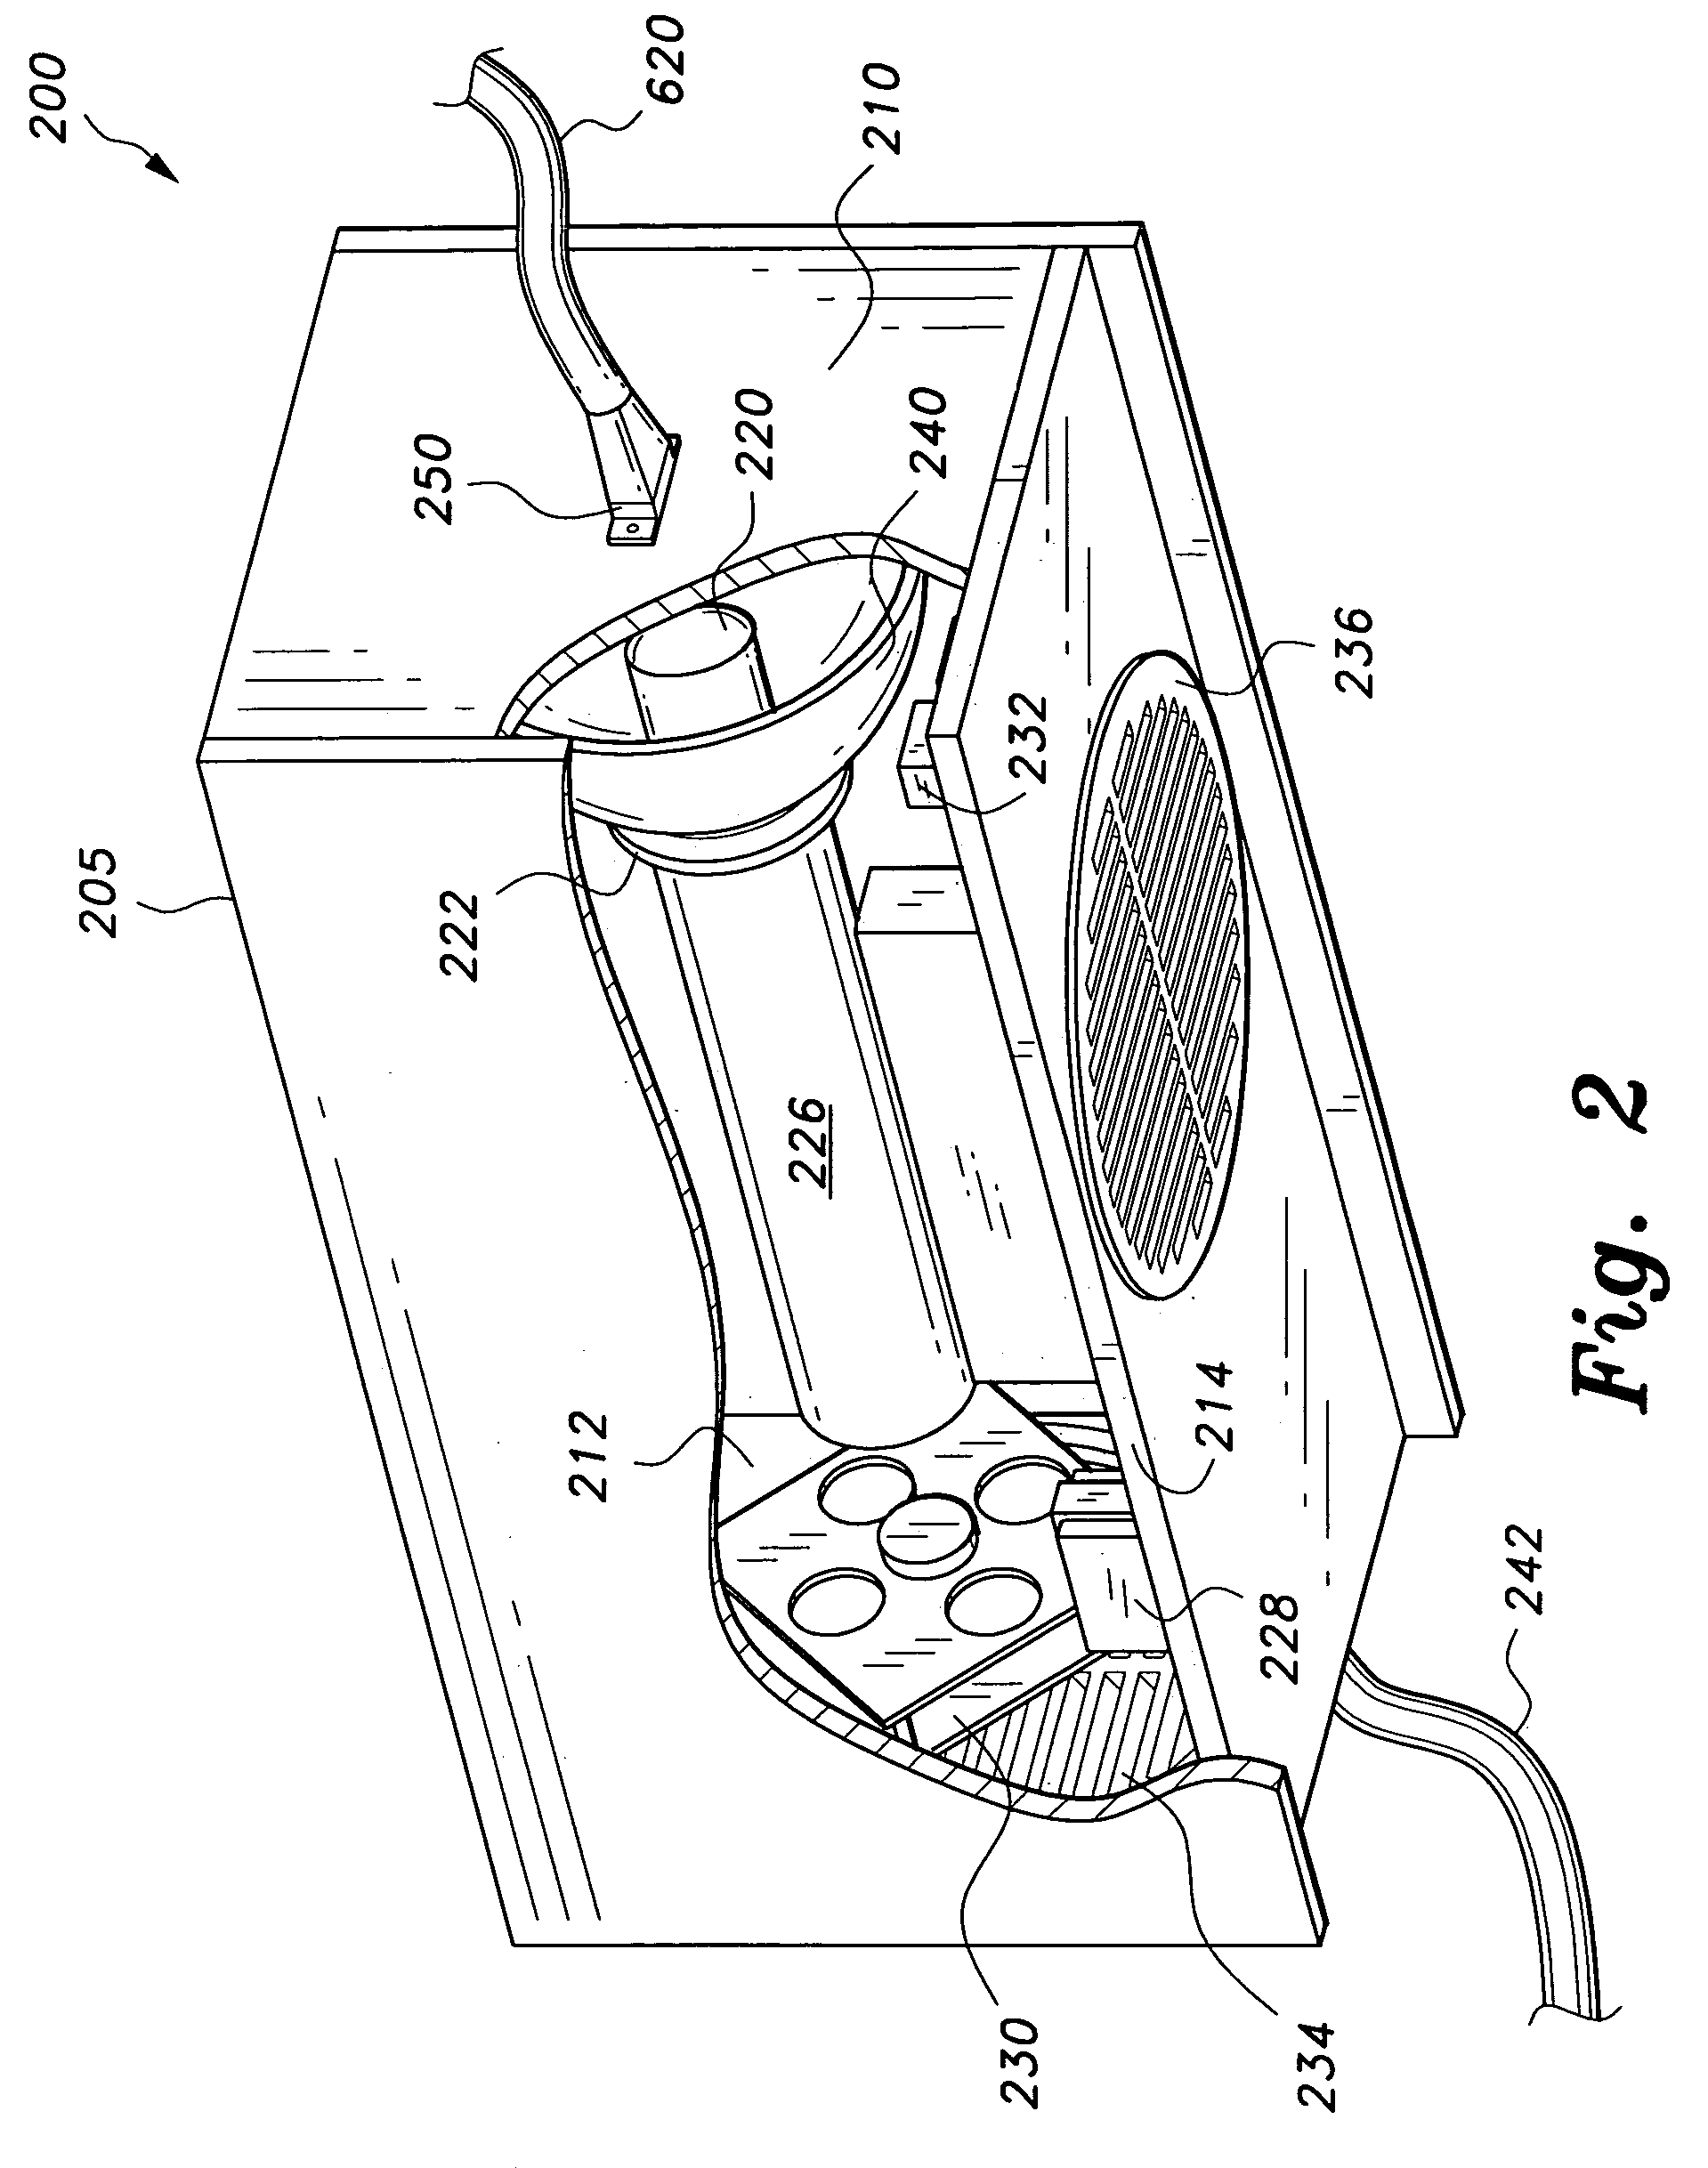 Device for ultraviolet radiation treatment of body tissues